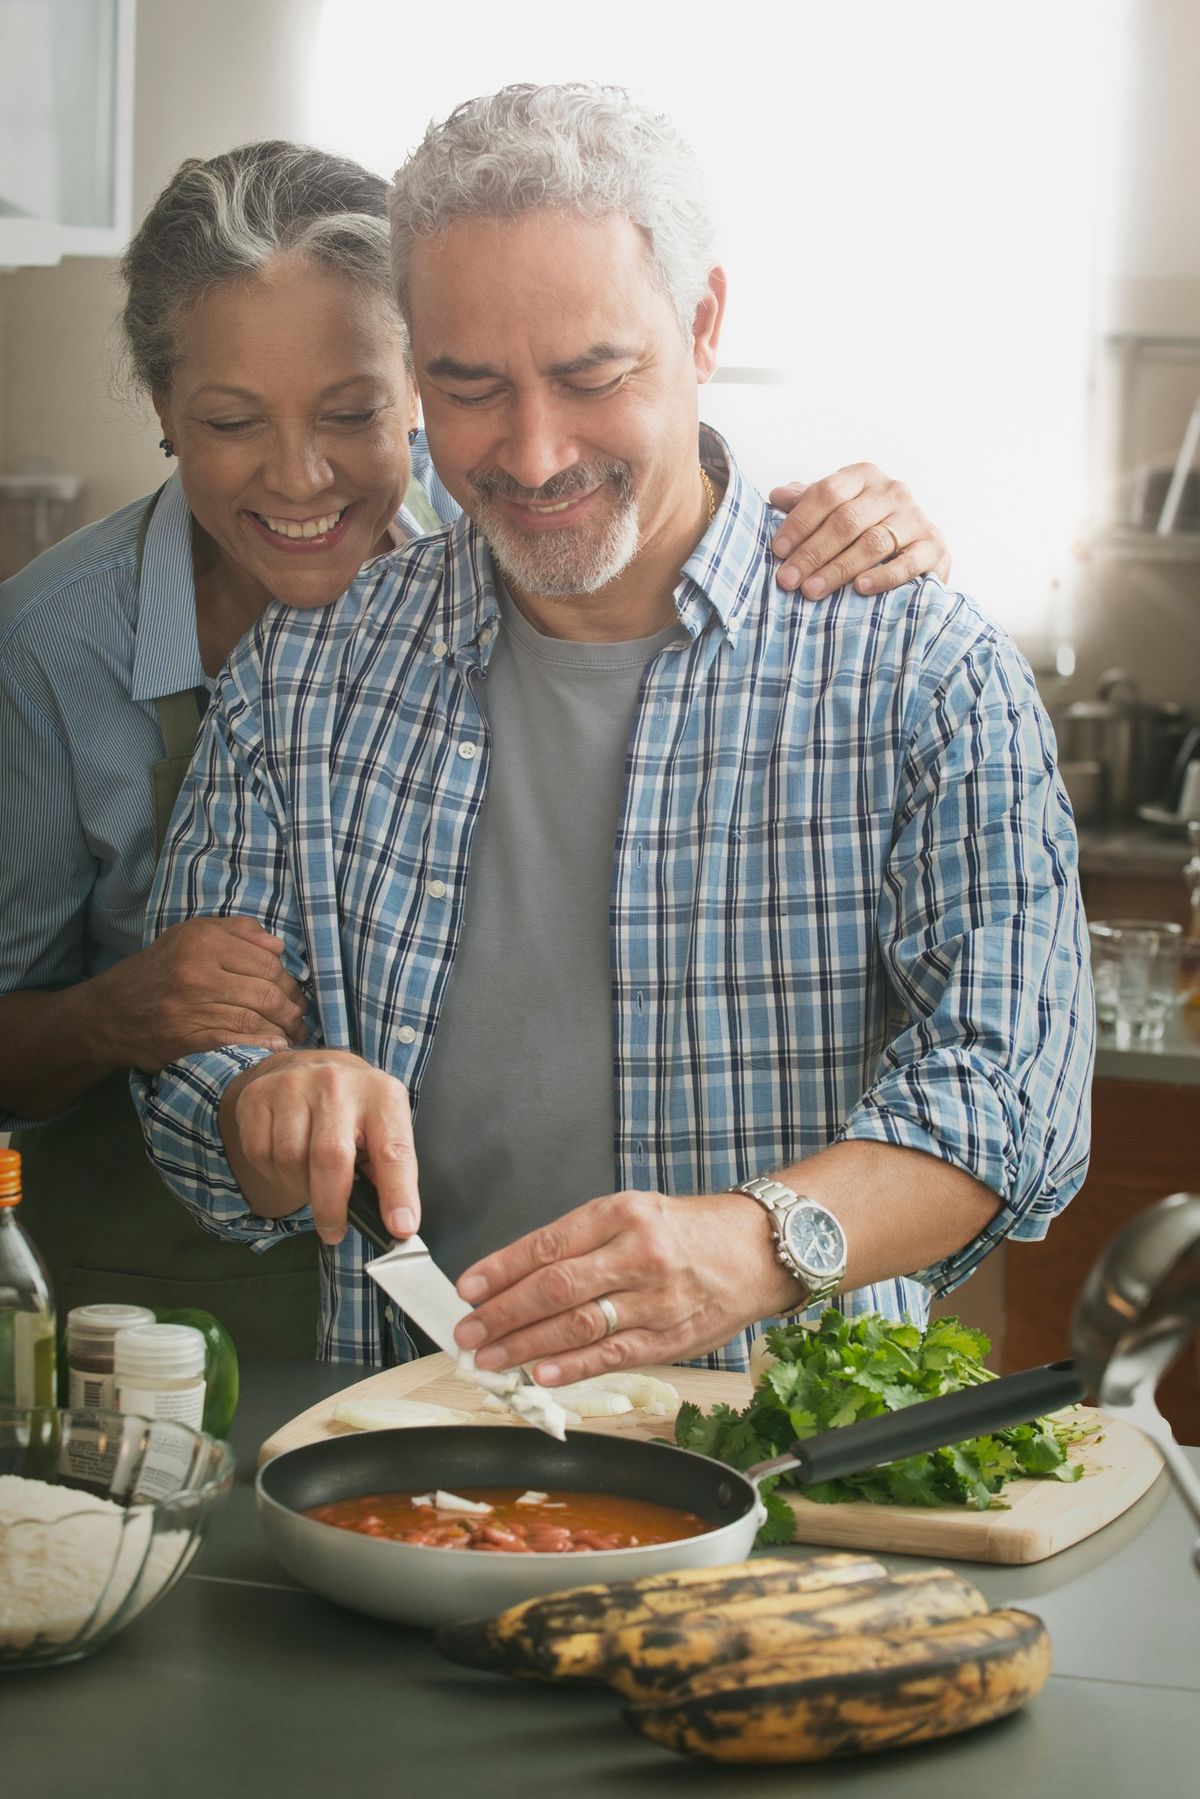 June 18 | Preserving and Cooking with Herbs, an AARP Nebraska Healthy Living Series Event